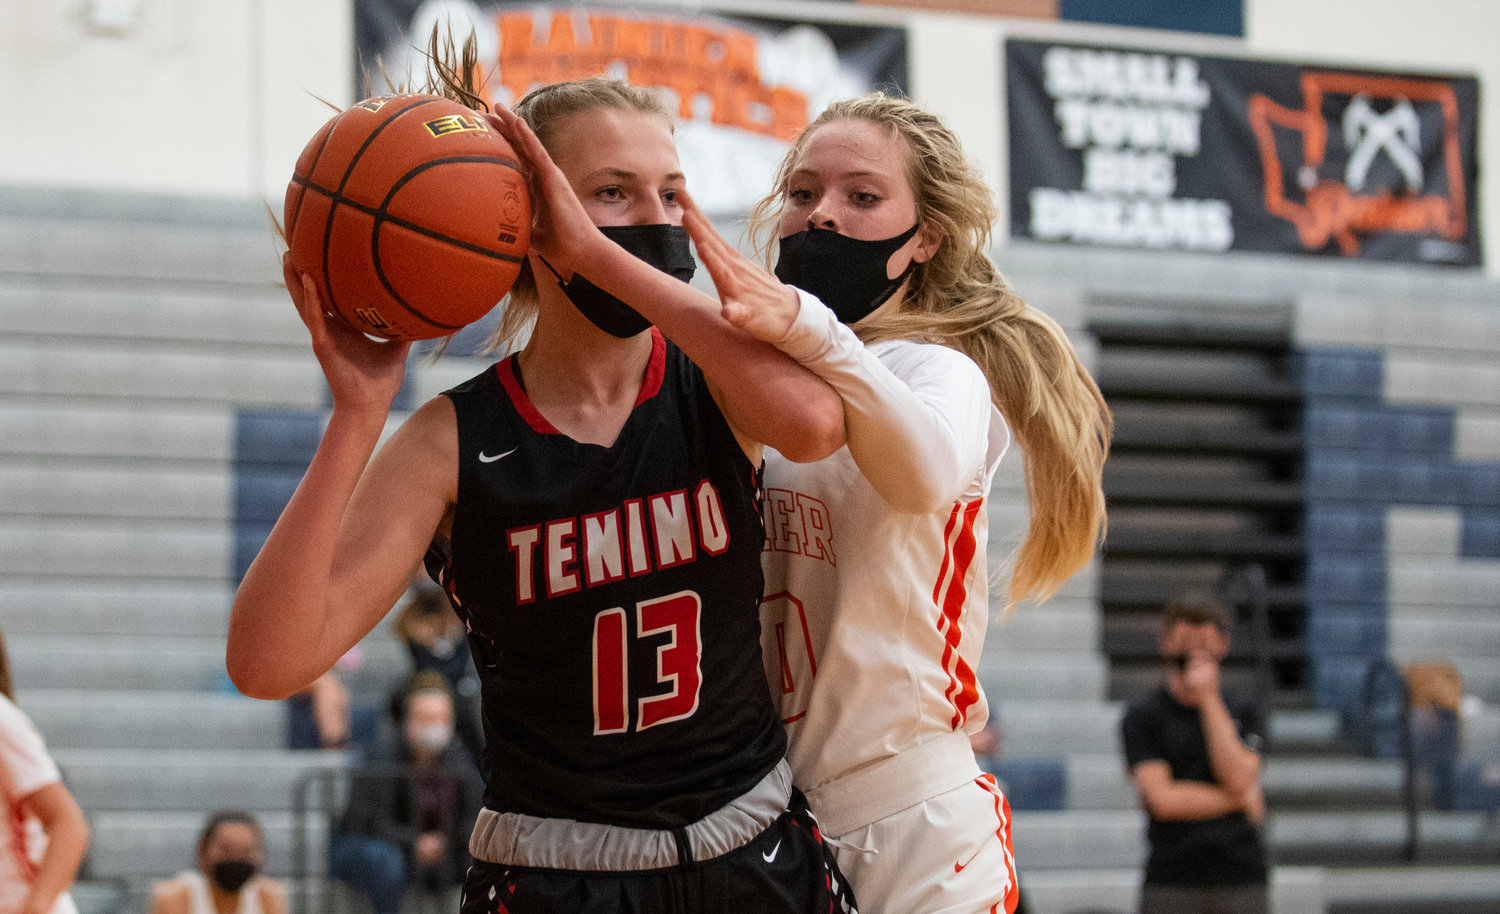 FILE PHOTO - Tenino's Rylee Jones (13) looks for an open pass while Rainier's Isabella Holmes defends.